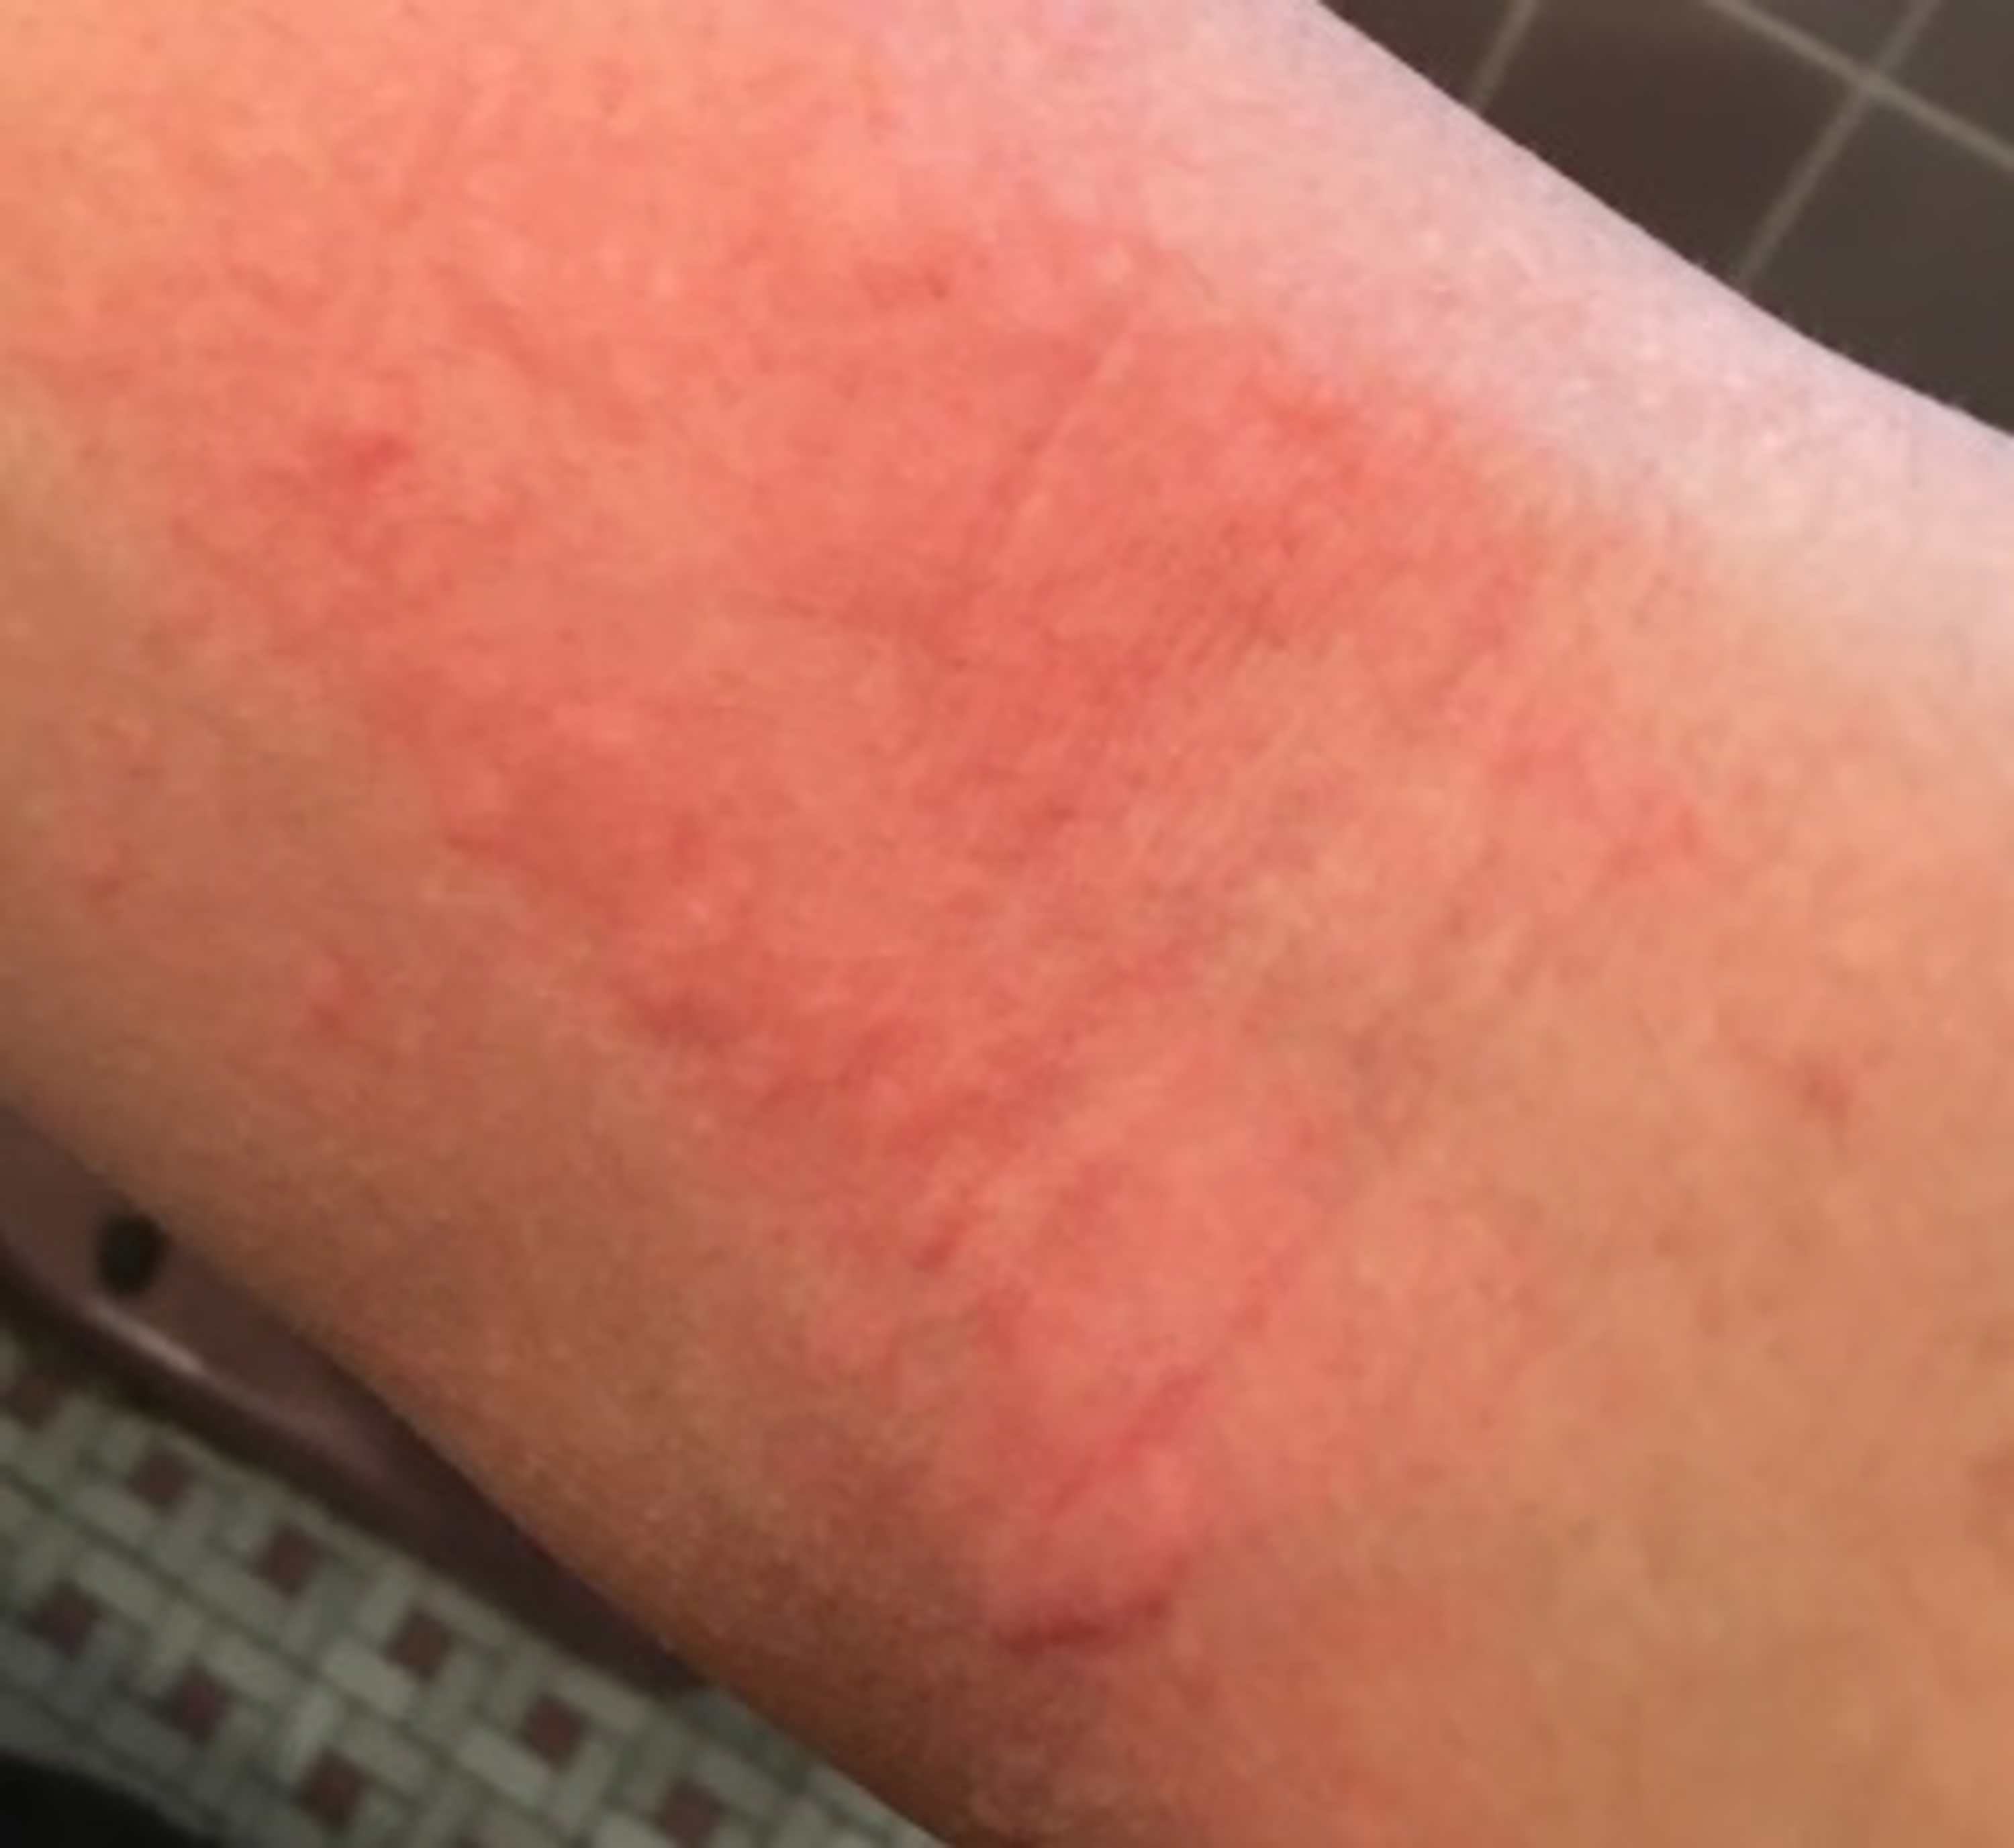 Cureus | Exercise-Induced Urticaria: A Case Report | Article